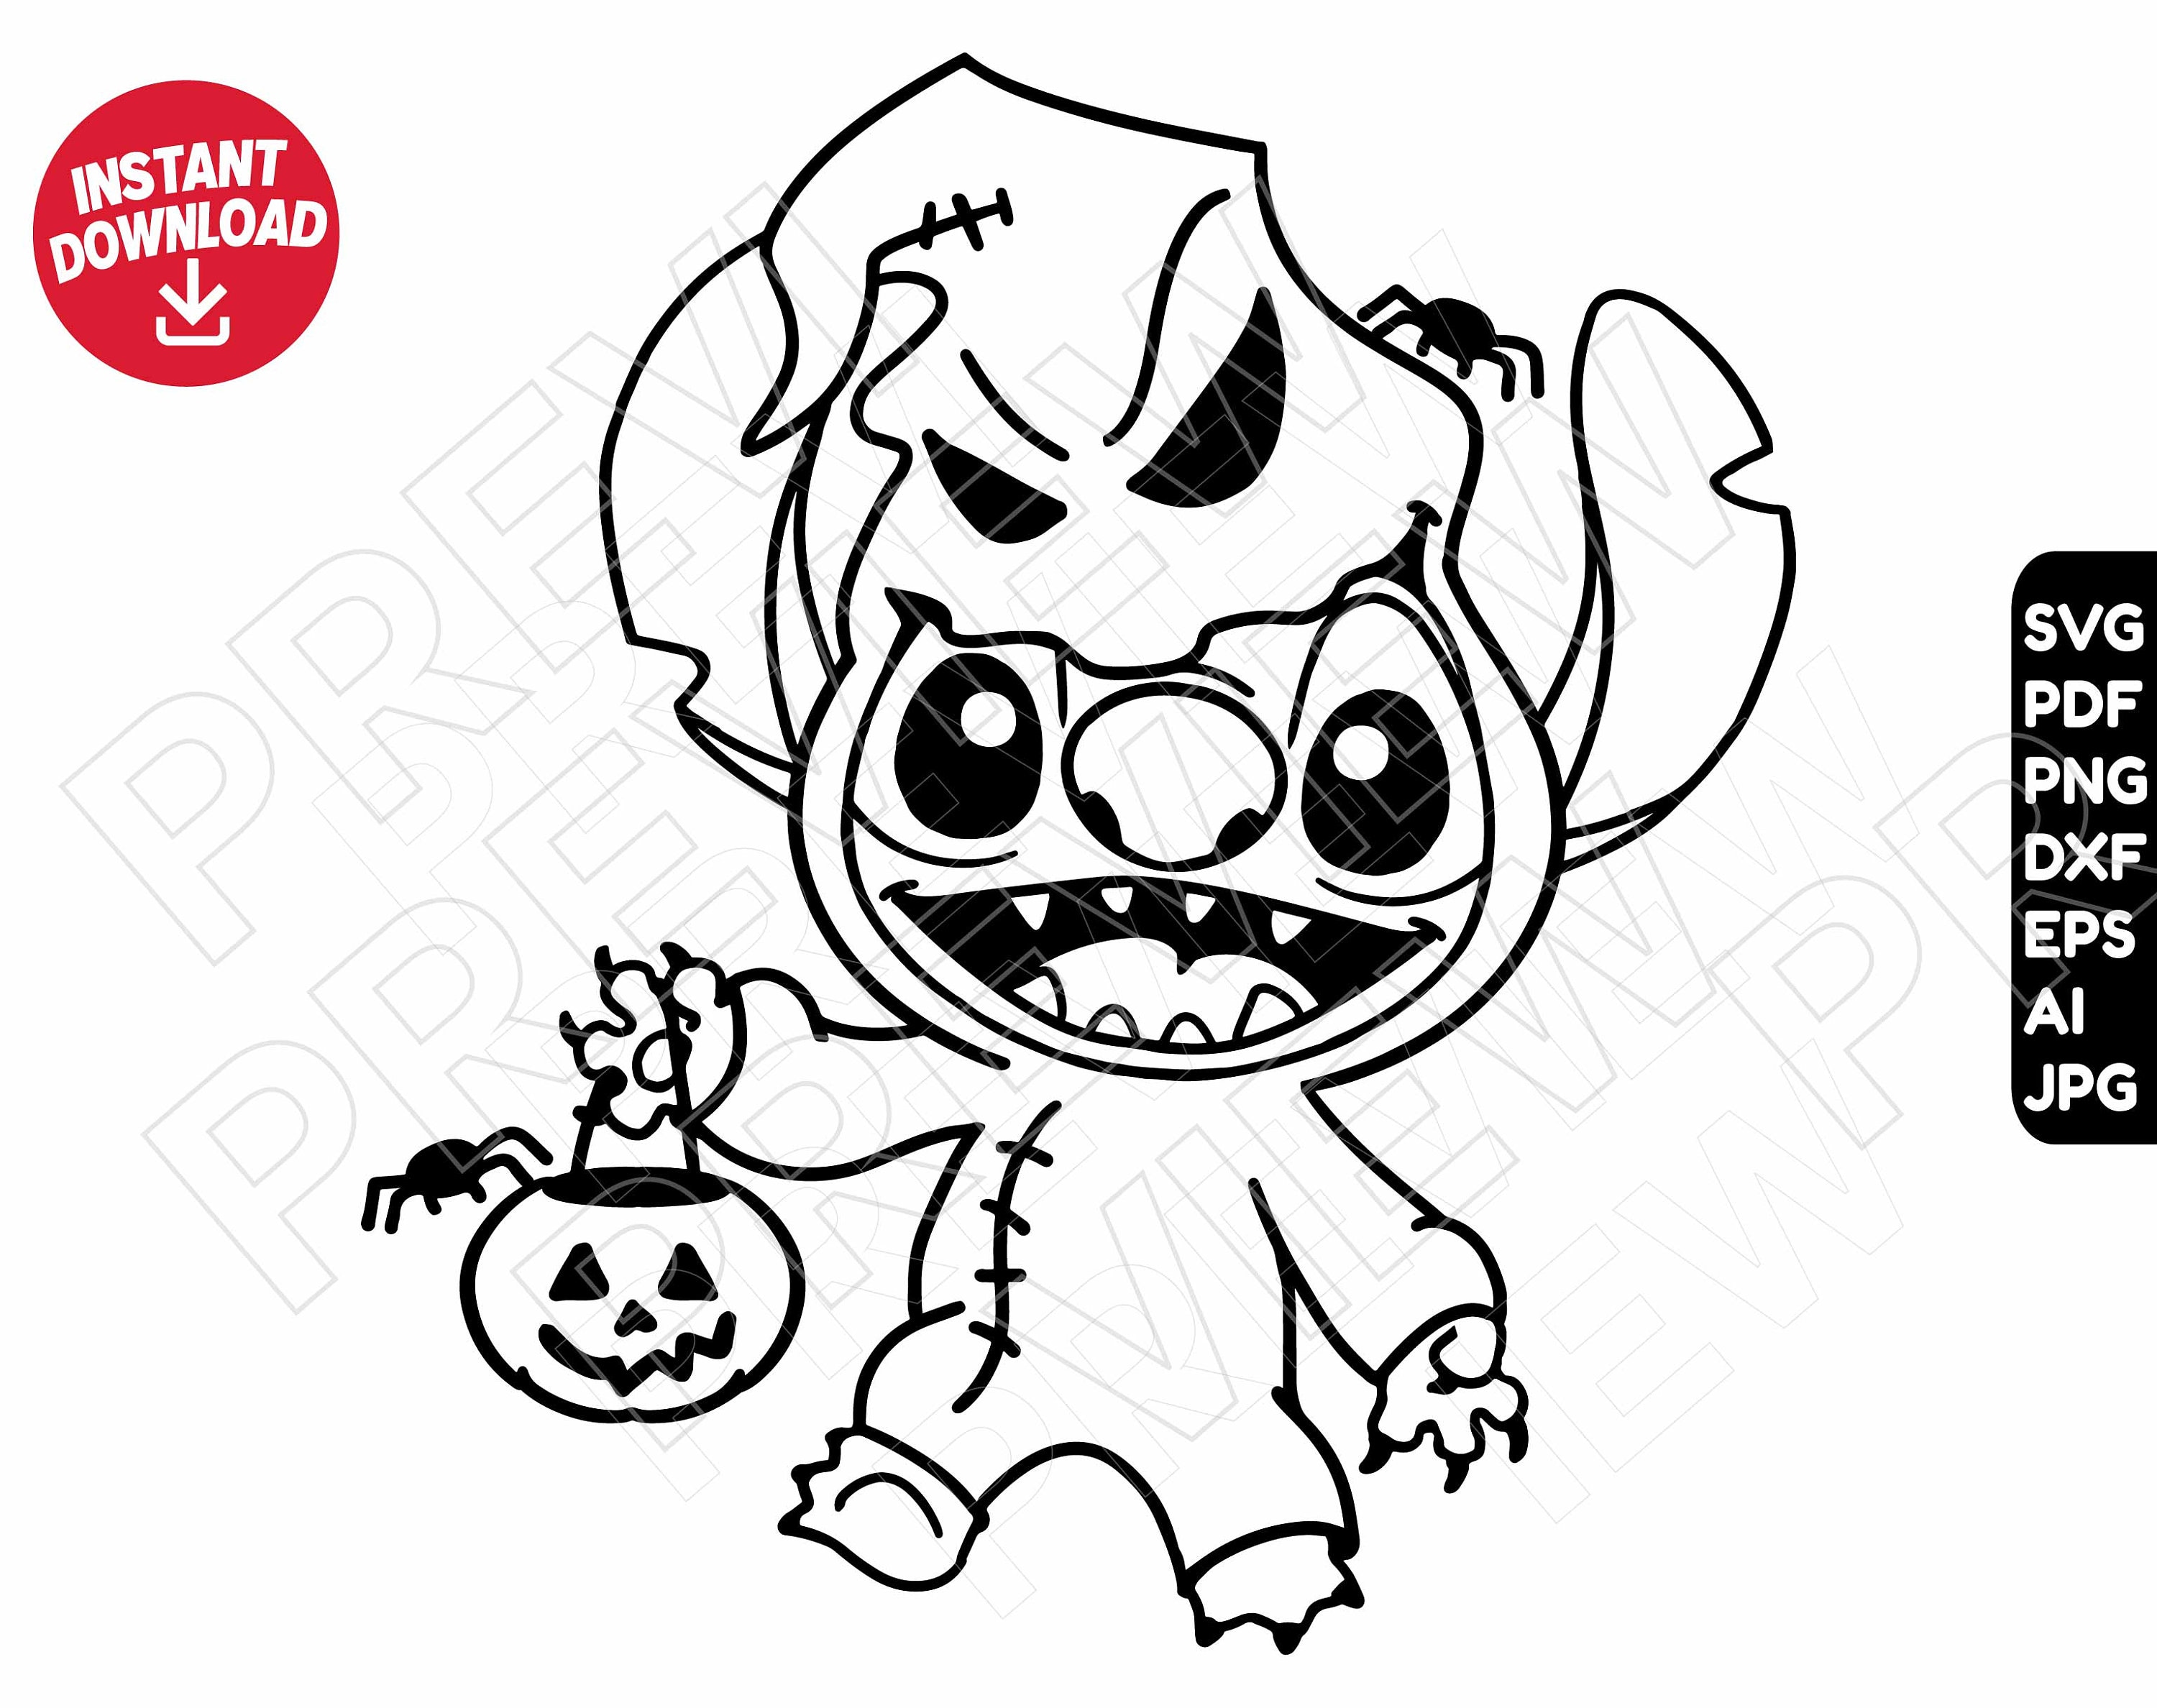 Stitch halloween svg oogie boogie dxf png clipart the nightmare before christmas cut file outline silhouette